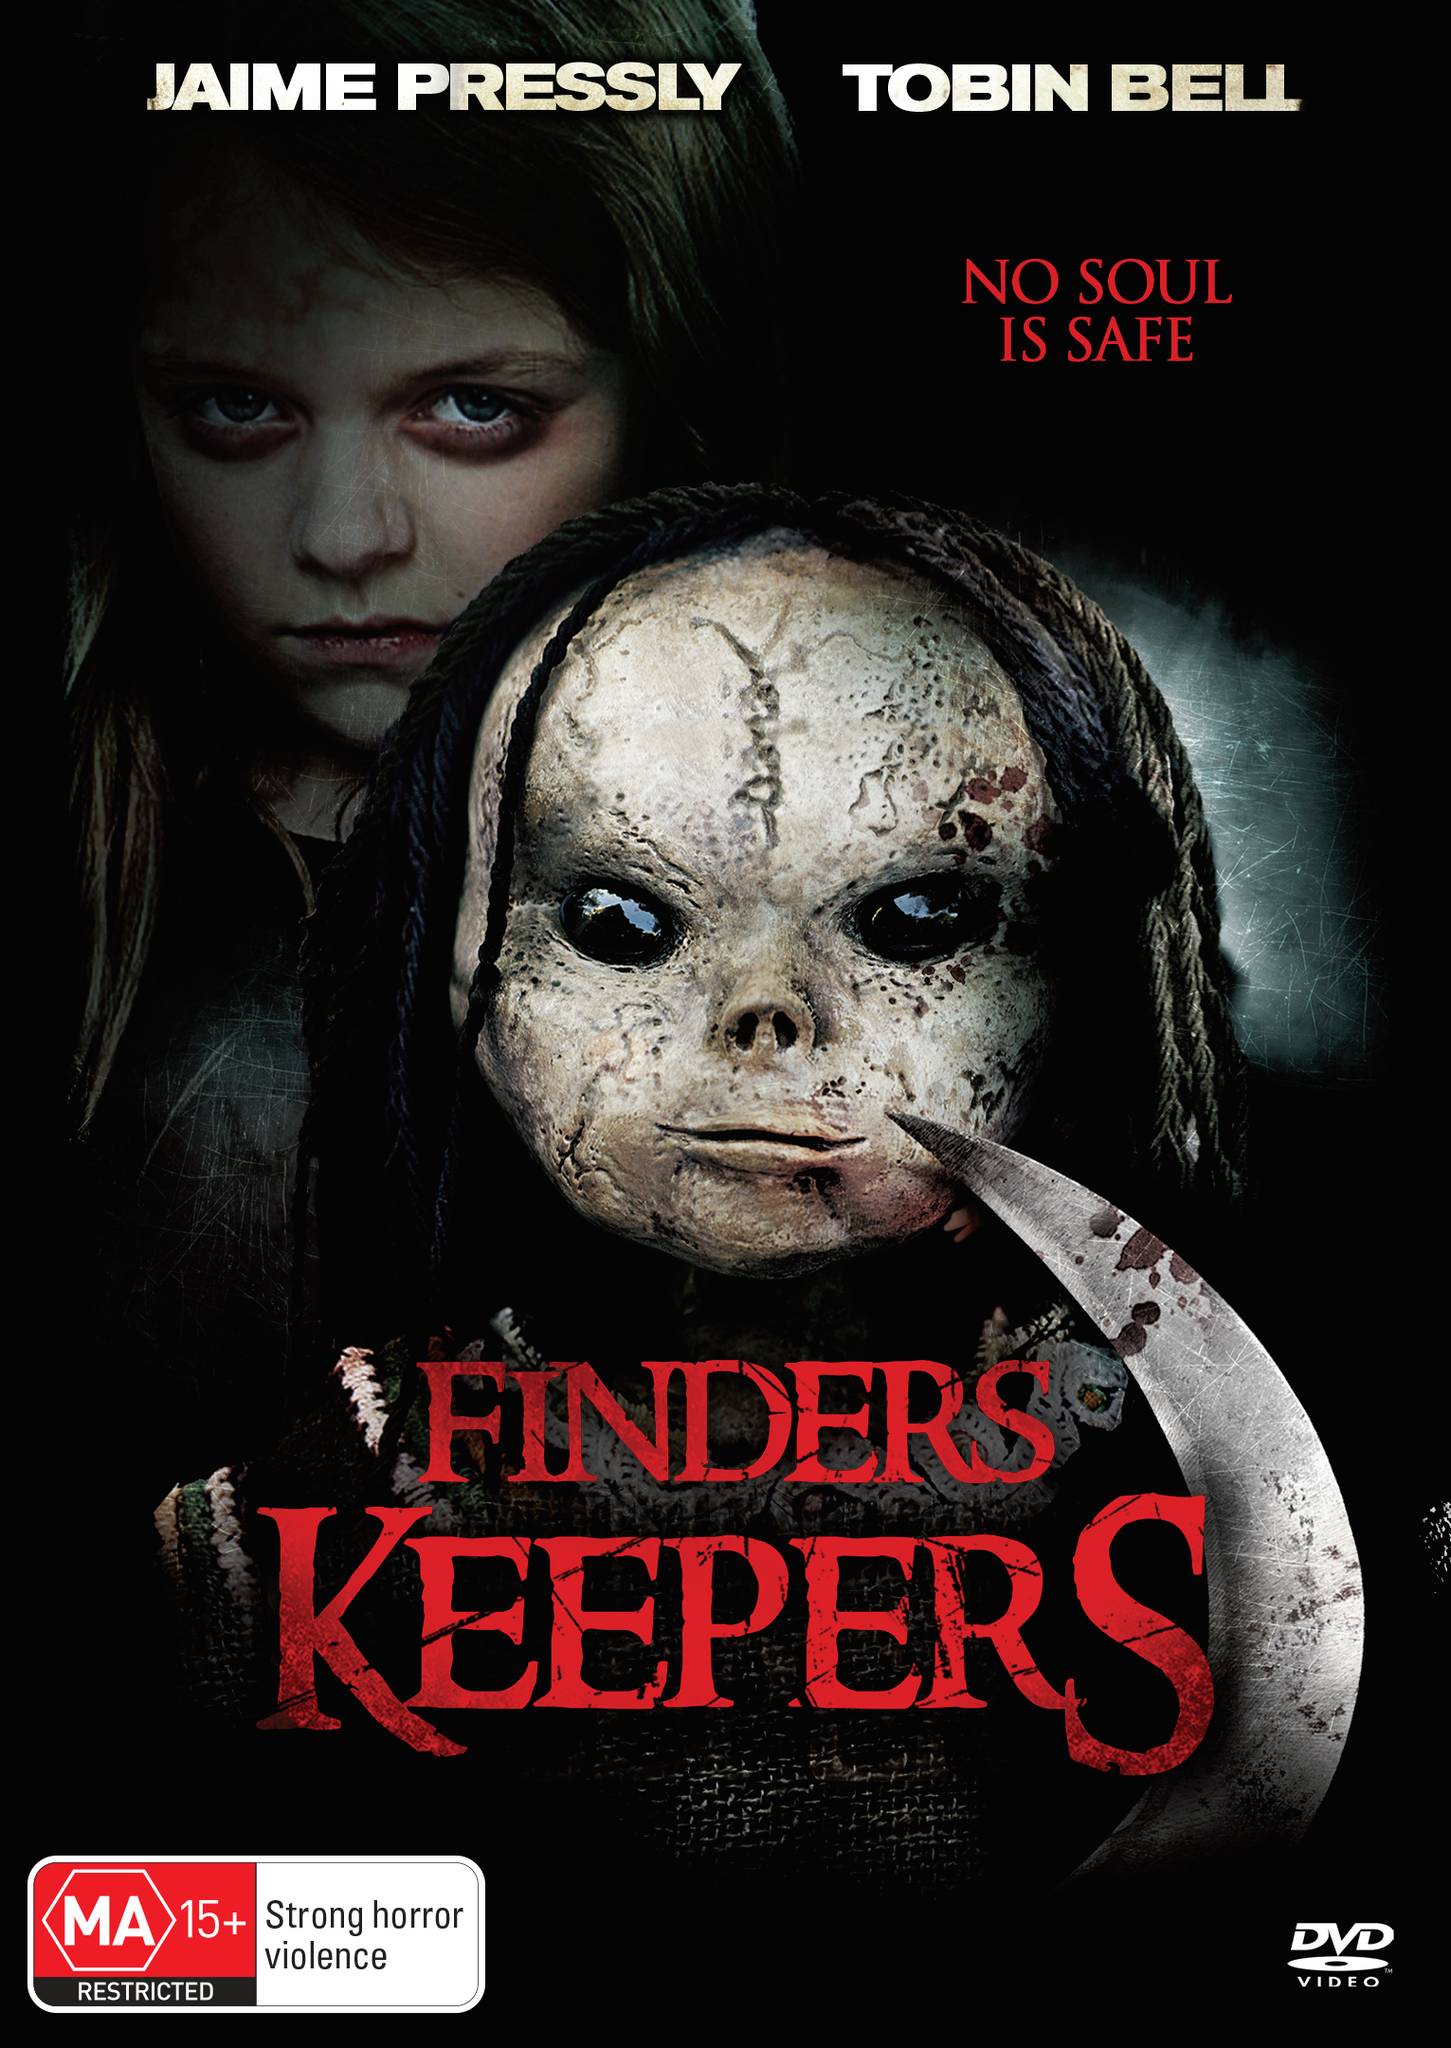 FINDERS KEEPERS - DVD